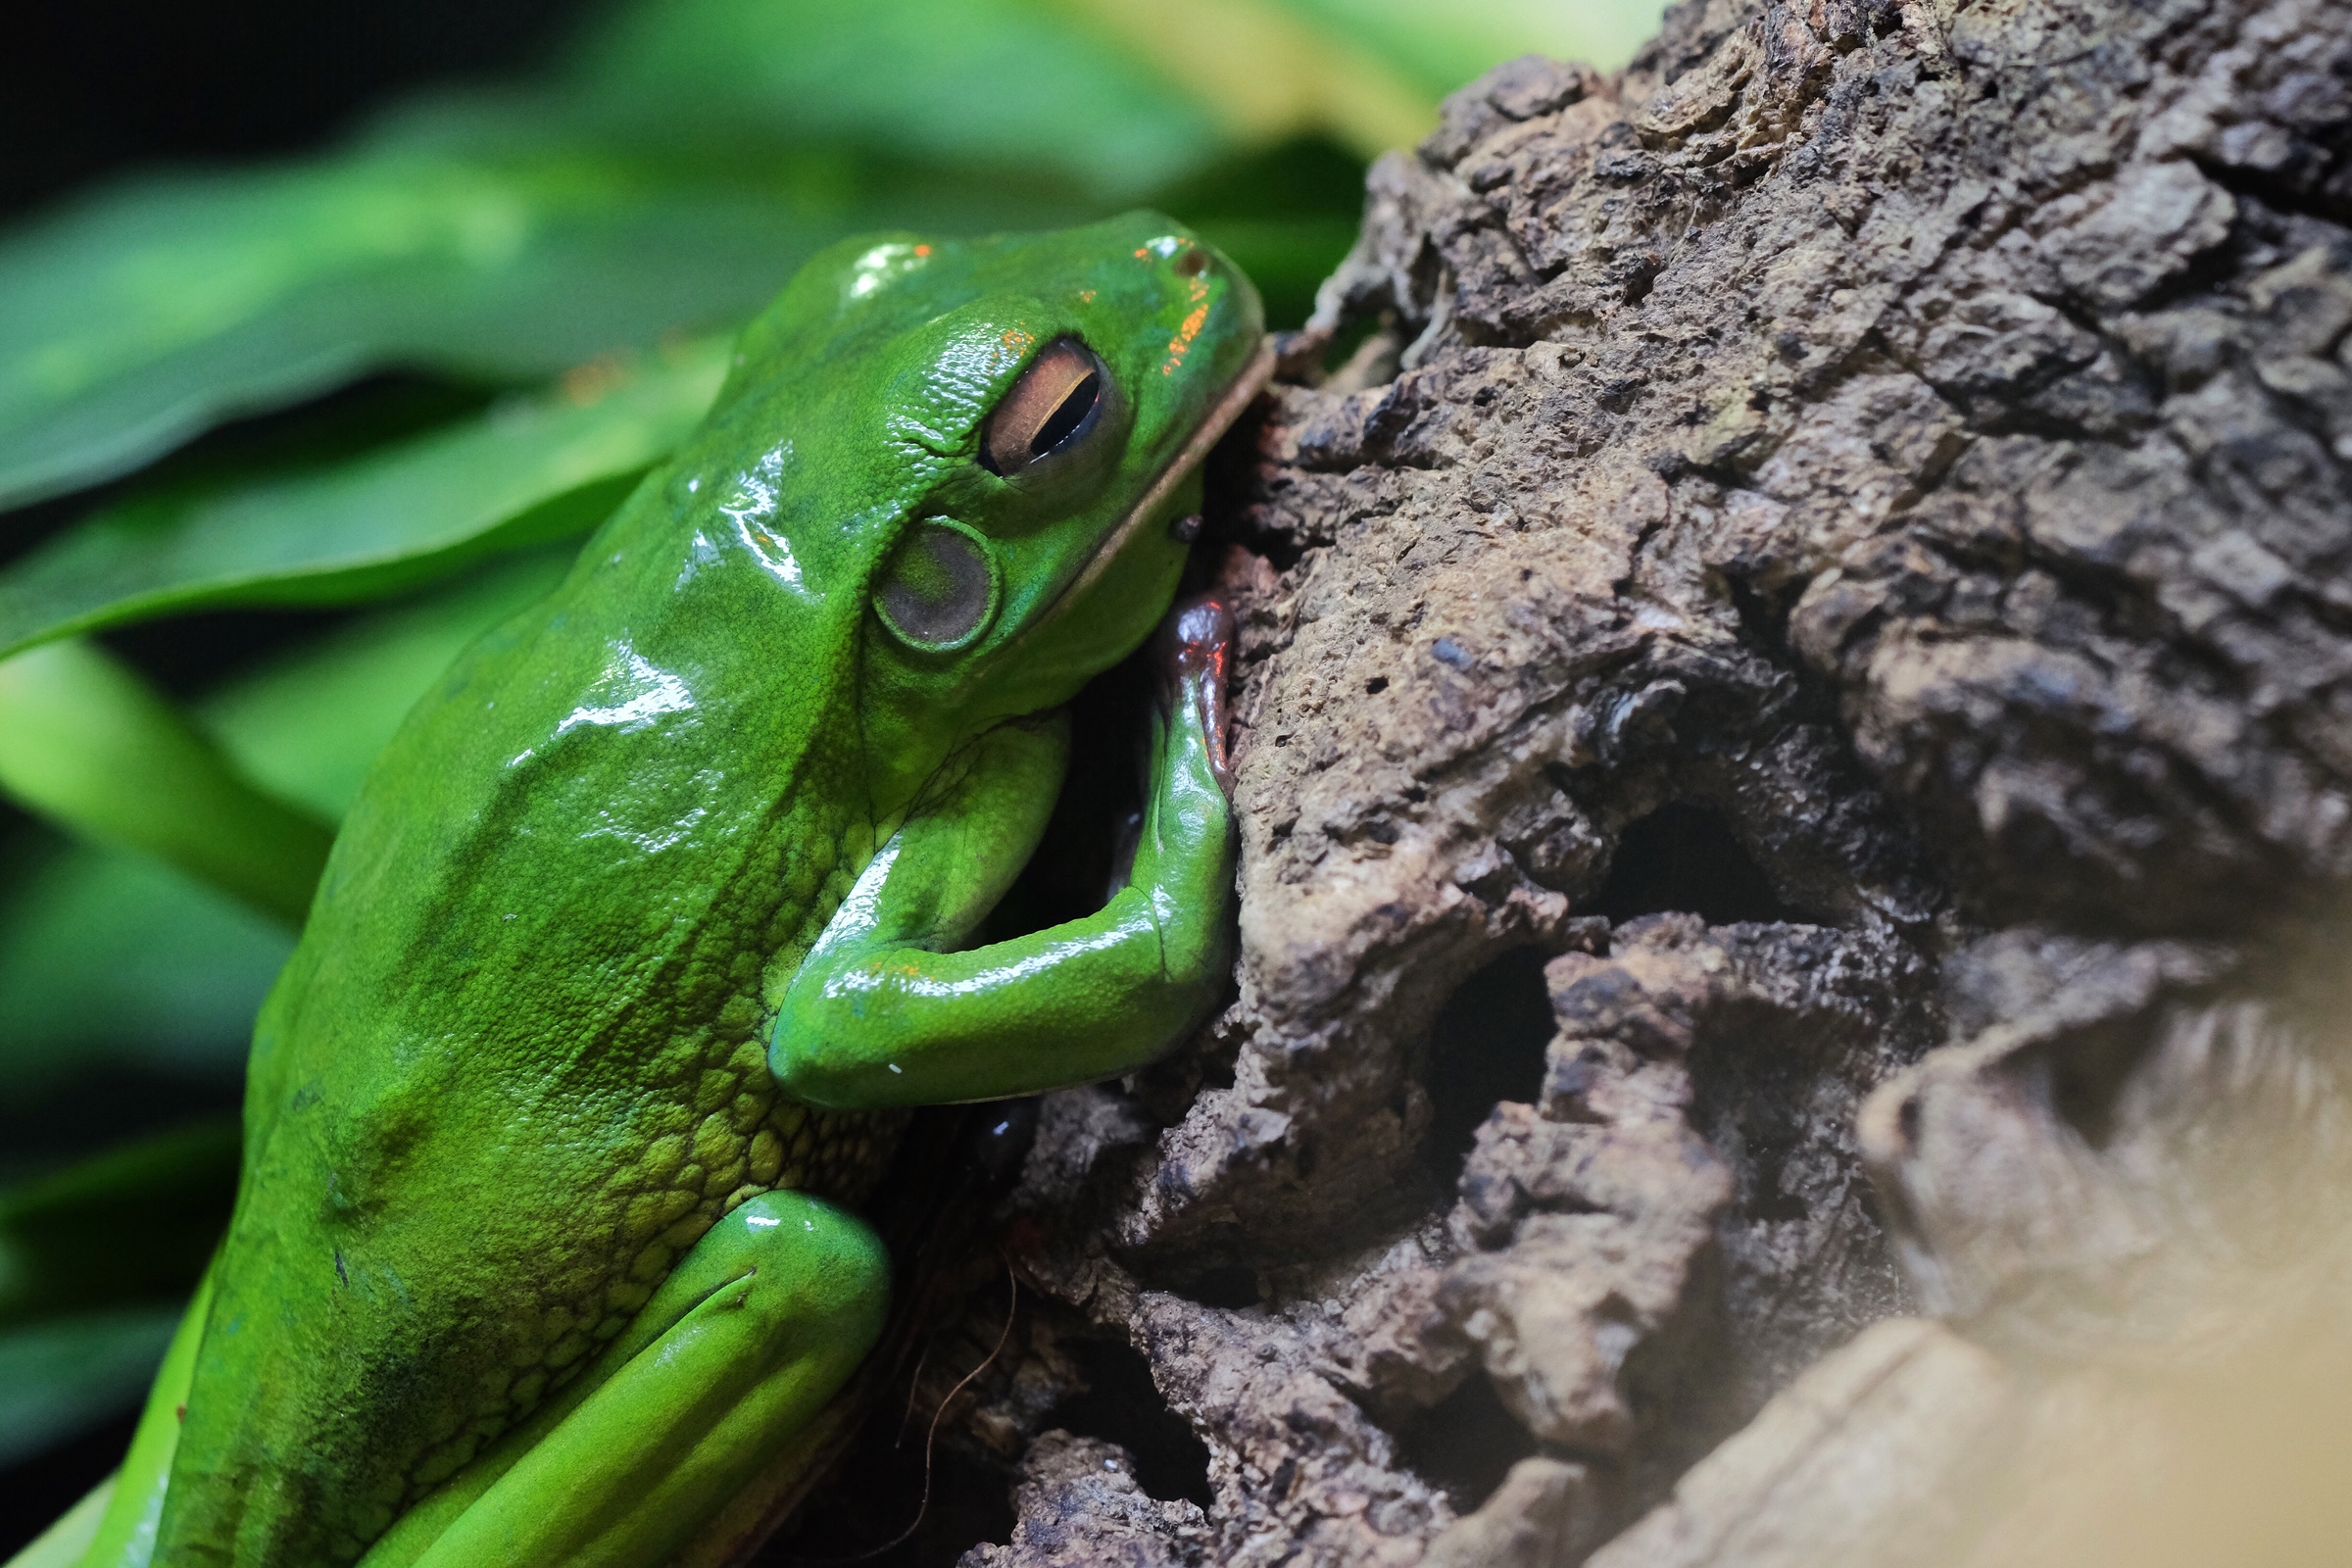 Waxy Tree Frog in the Reptile House in Bioparco Rome.